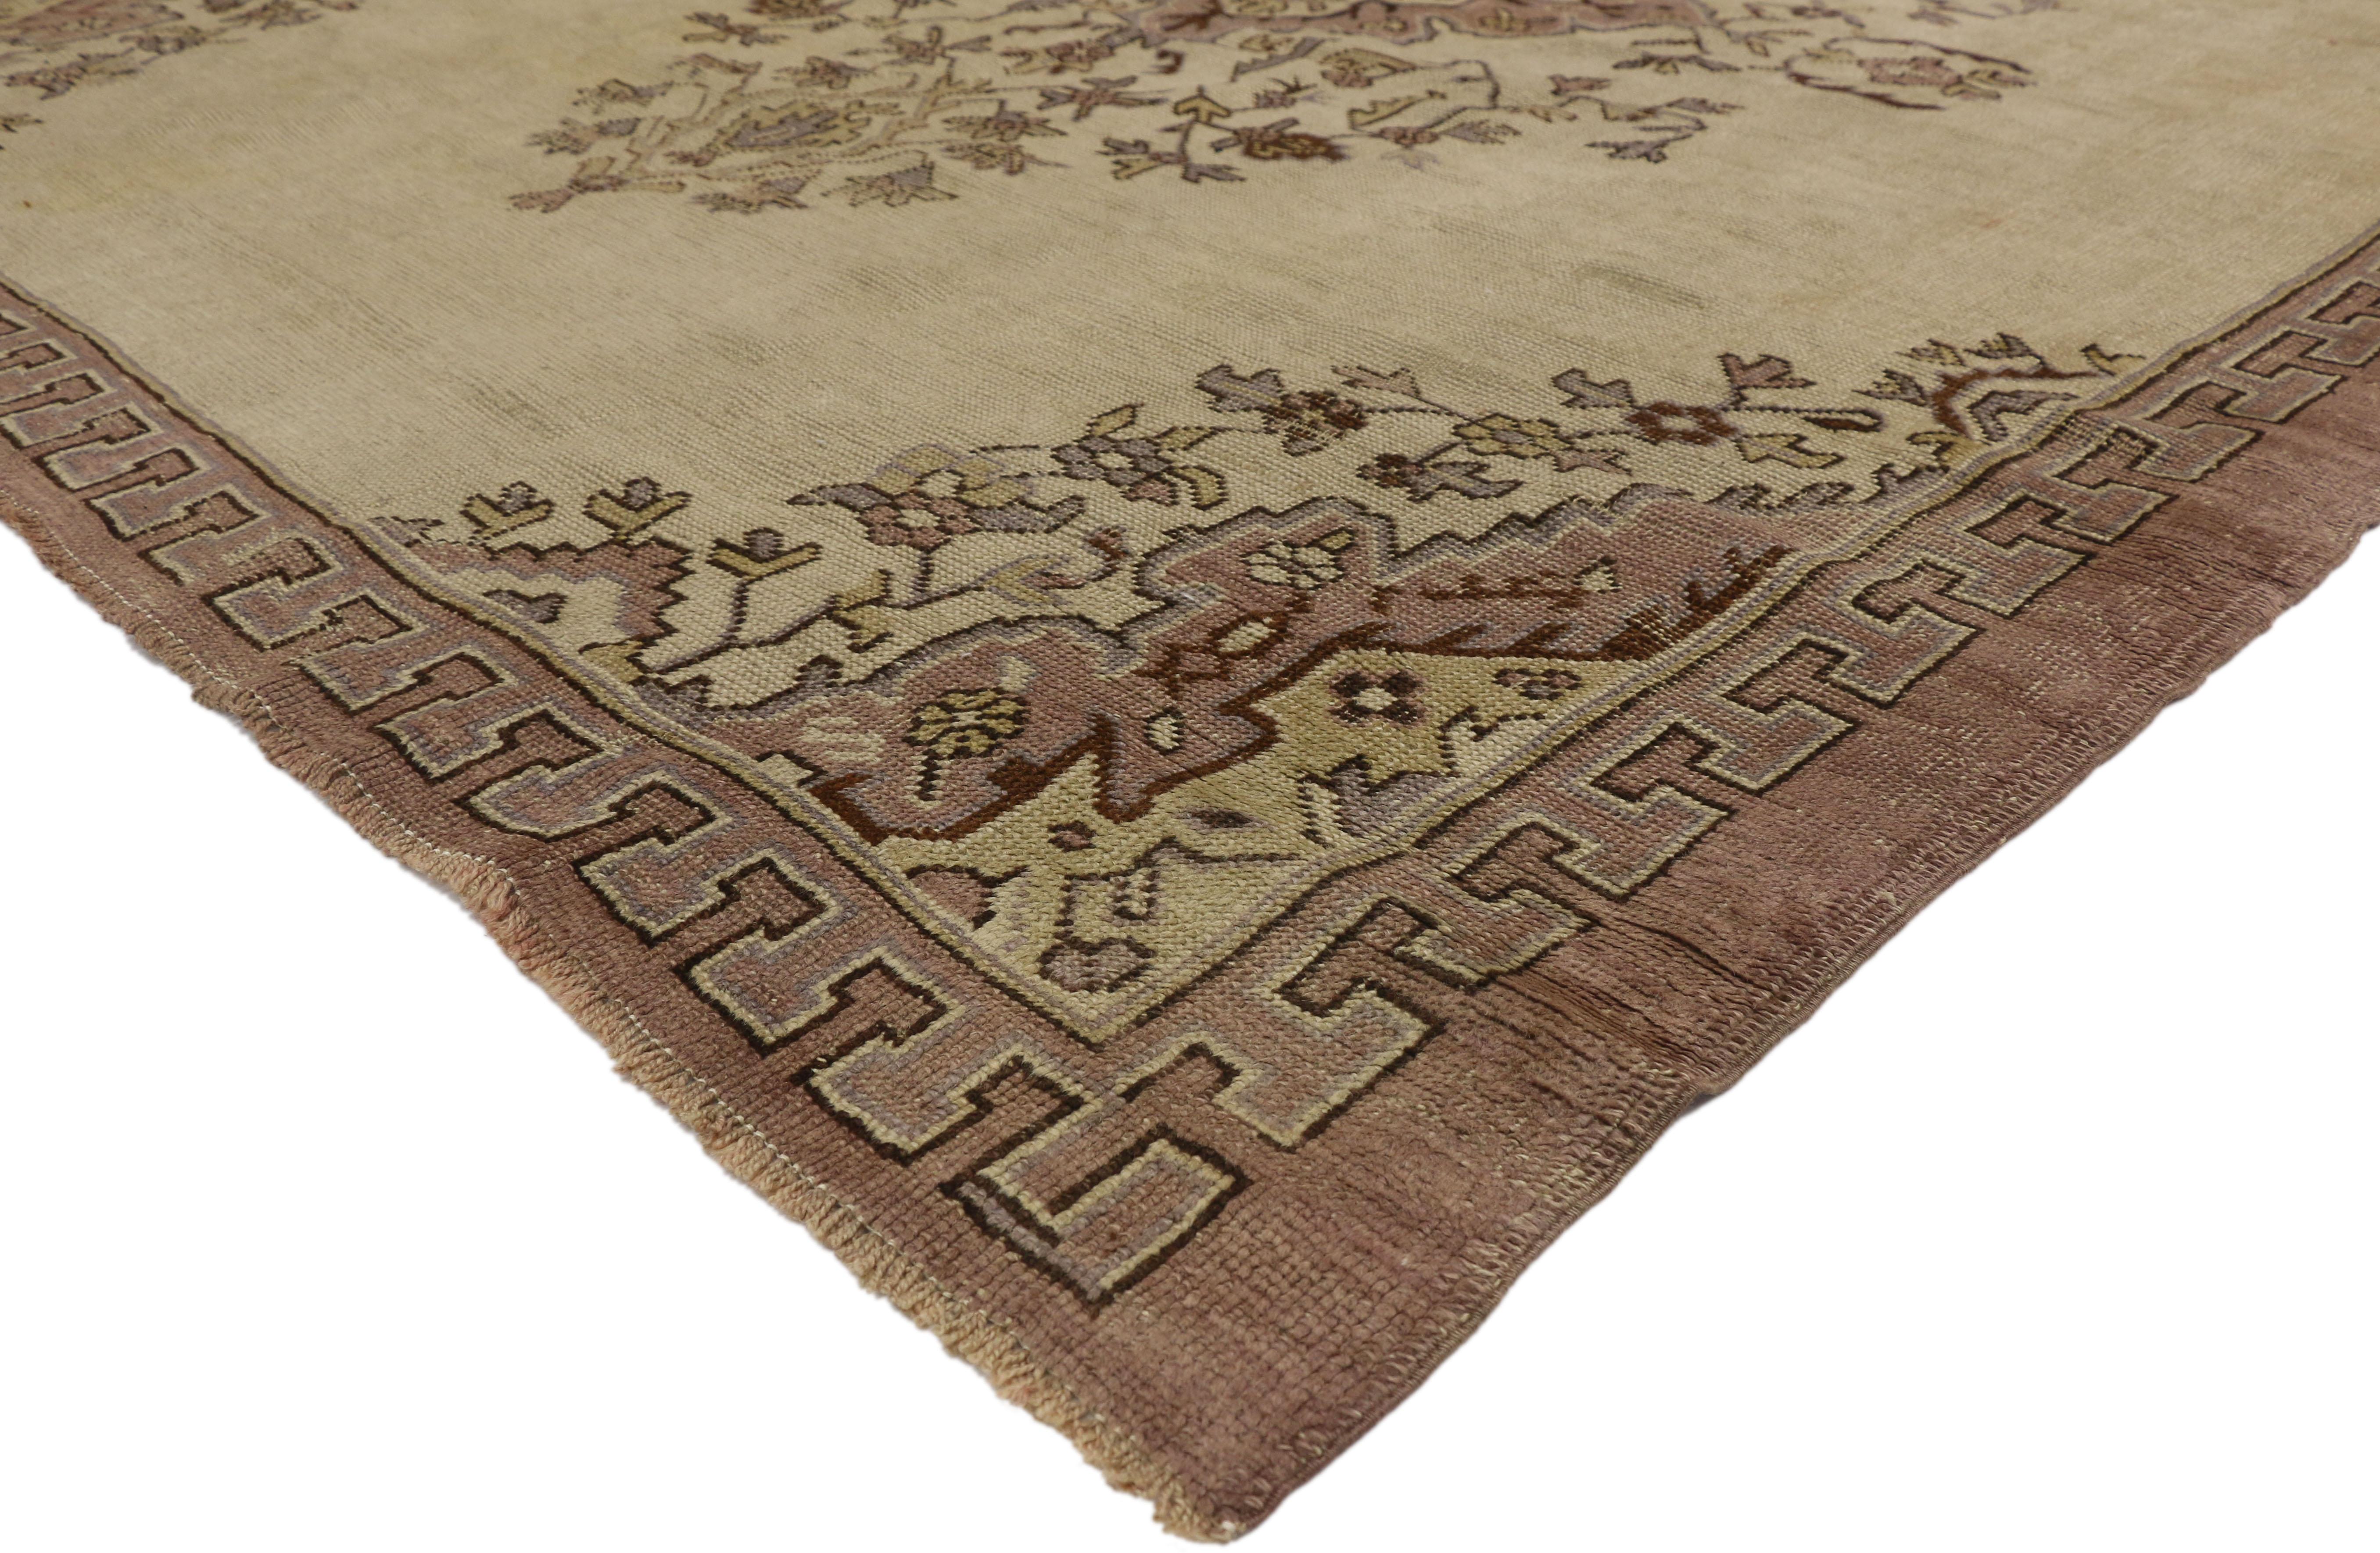 51452 Distressed Vintage Turkish Oushak Rug with Shabby Chic Rococo Style 08'03 x 10'02. With an elaborate design, weathered composition, and pastel colors, this hand knotted wool distressed vintage Turkish Oushak rug beautifully embodies Shabby